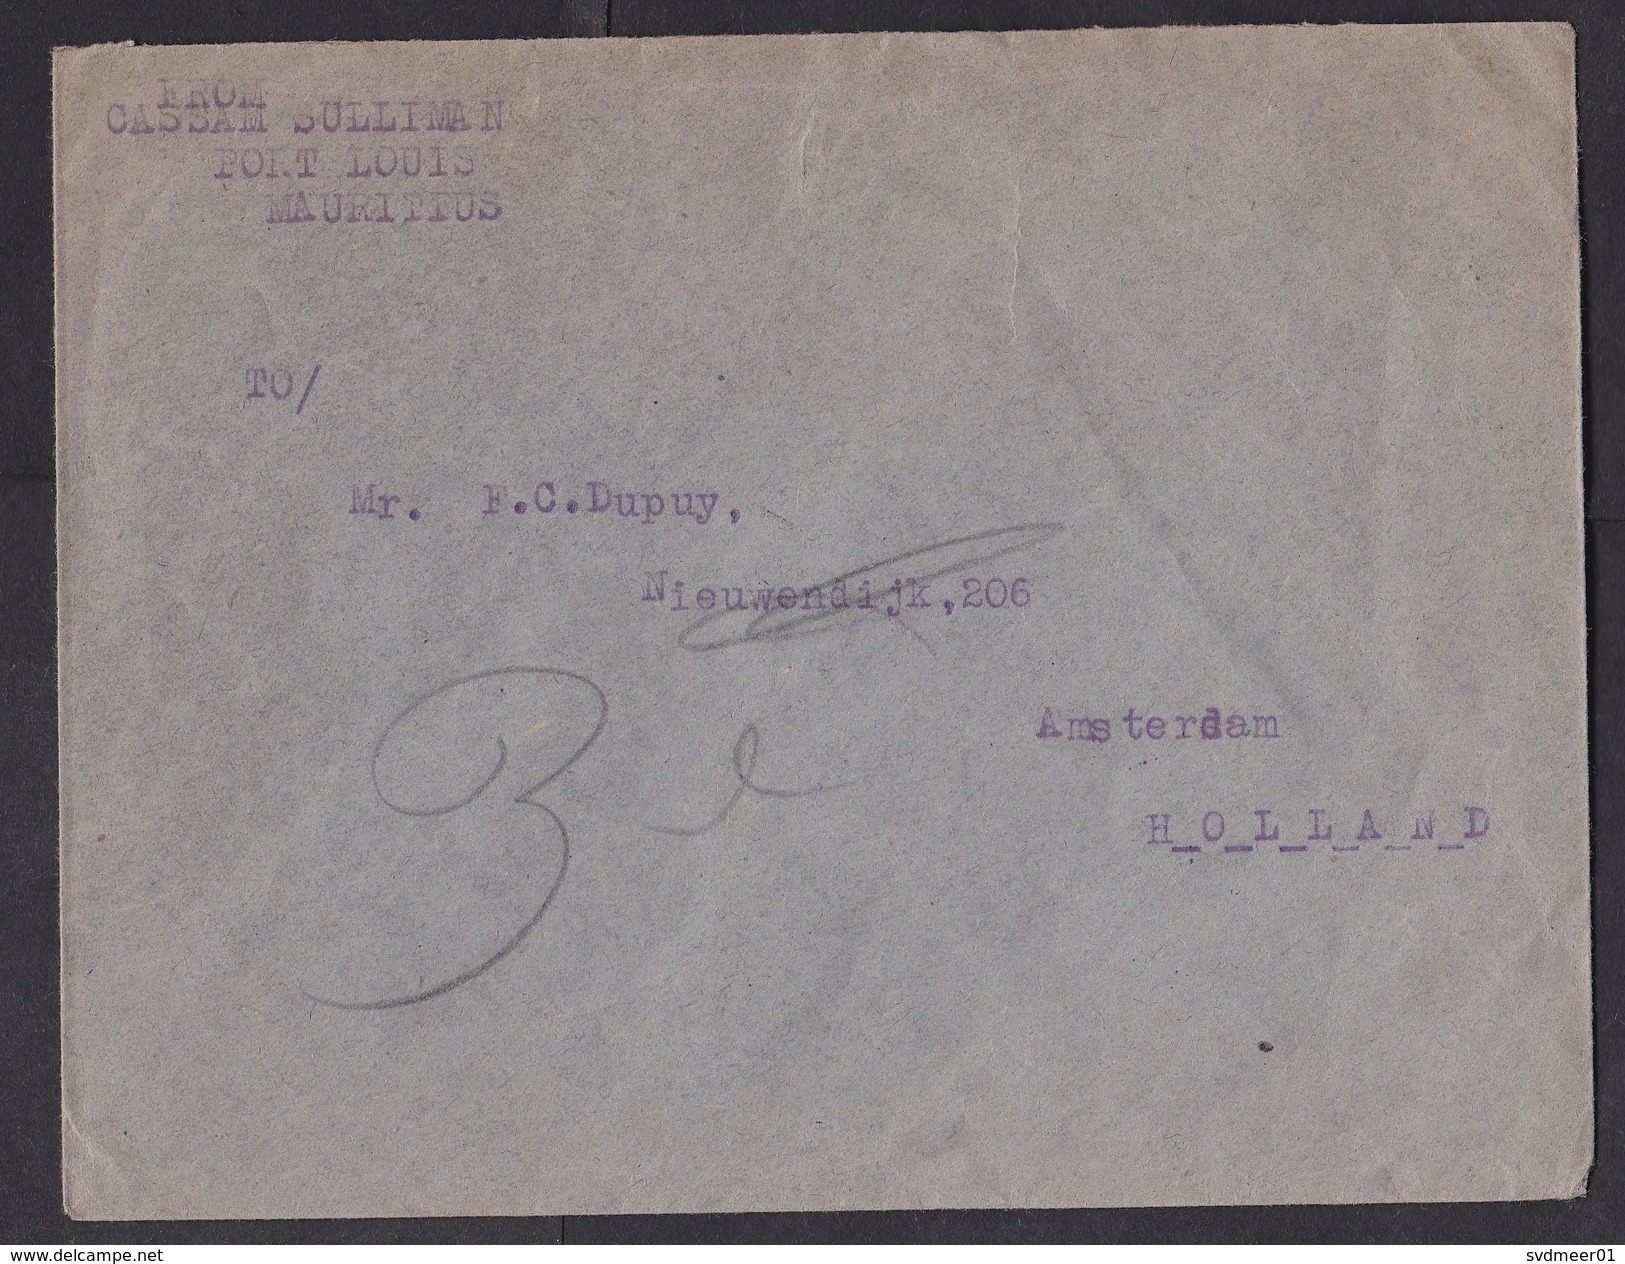 Mauritius: Cover To Netherlands, 1930s? 1 Stamp, Heraldry (traces Of Use) - Mauritius (1968-...)